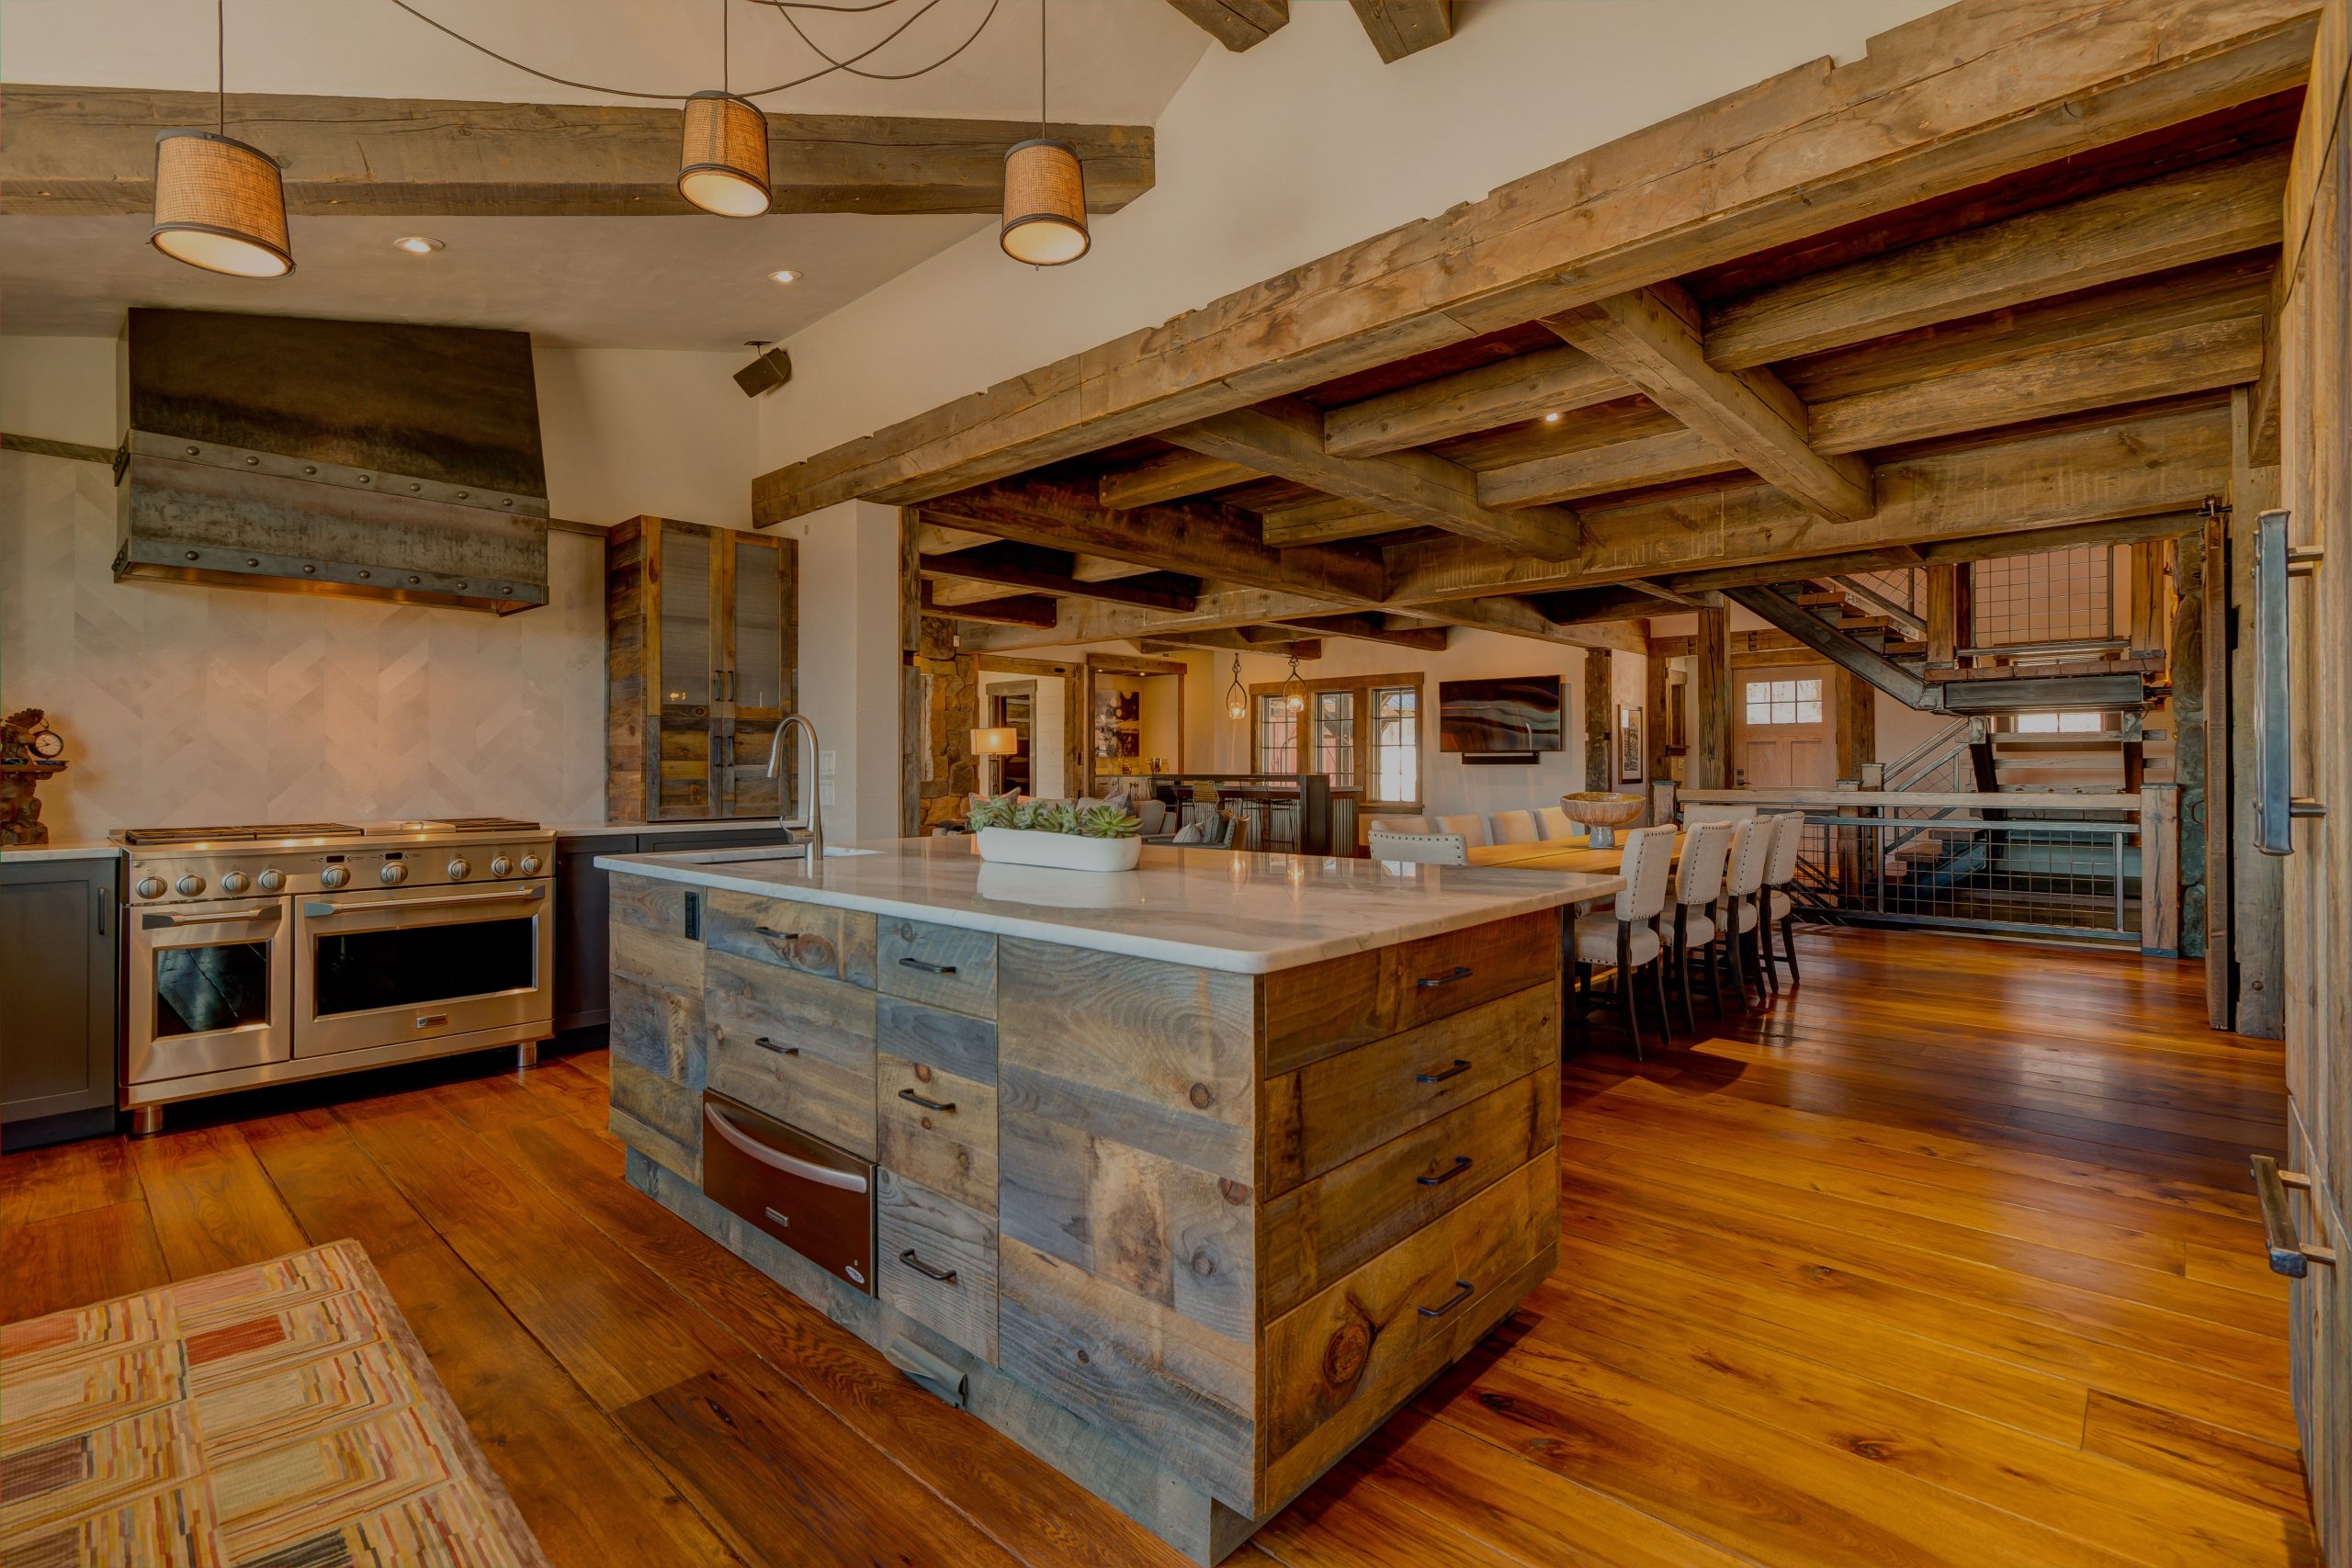 Rustic retreat with reclaimed wood accents